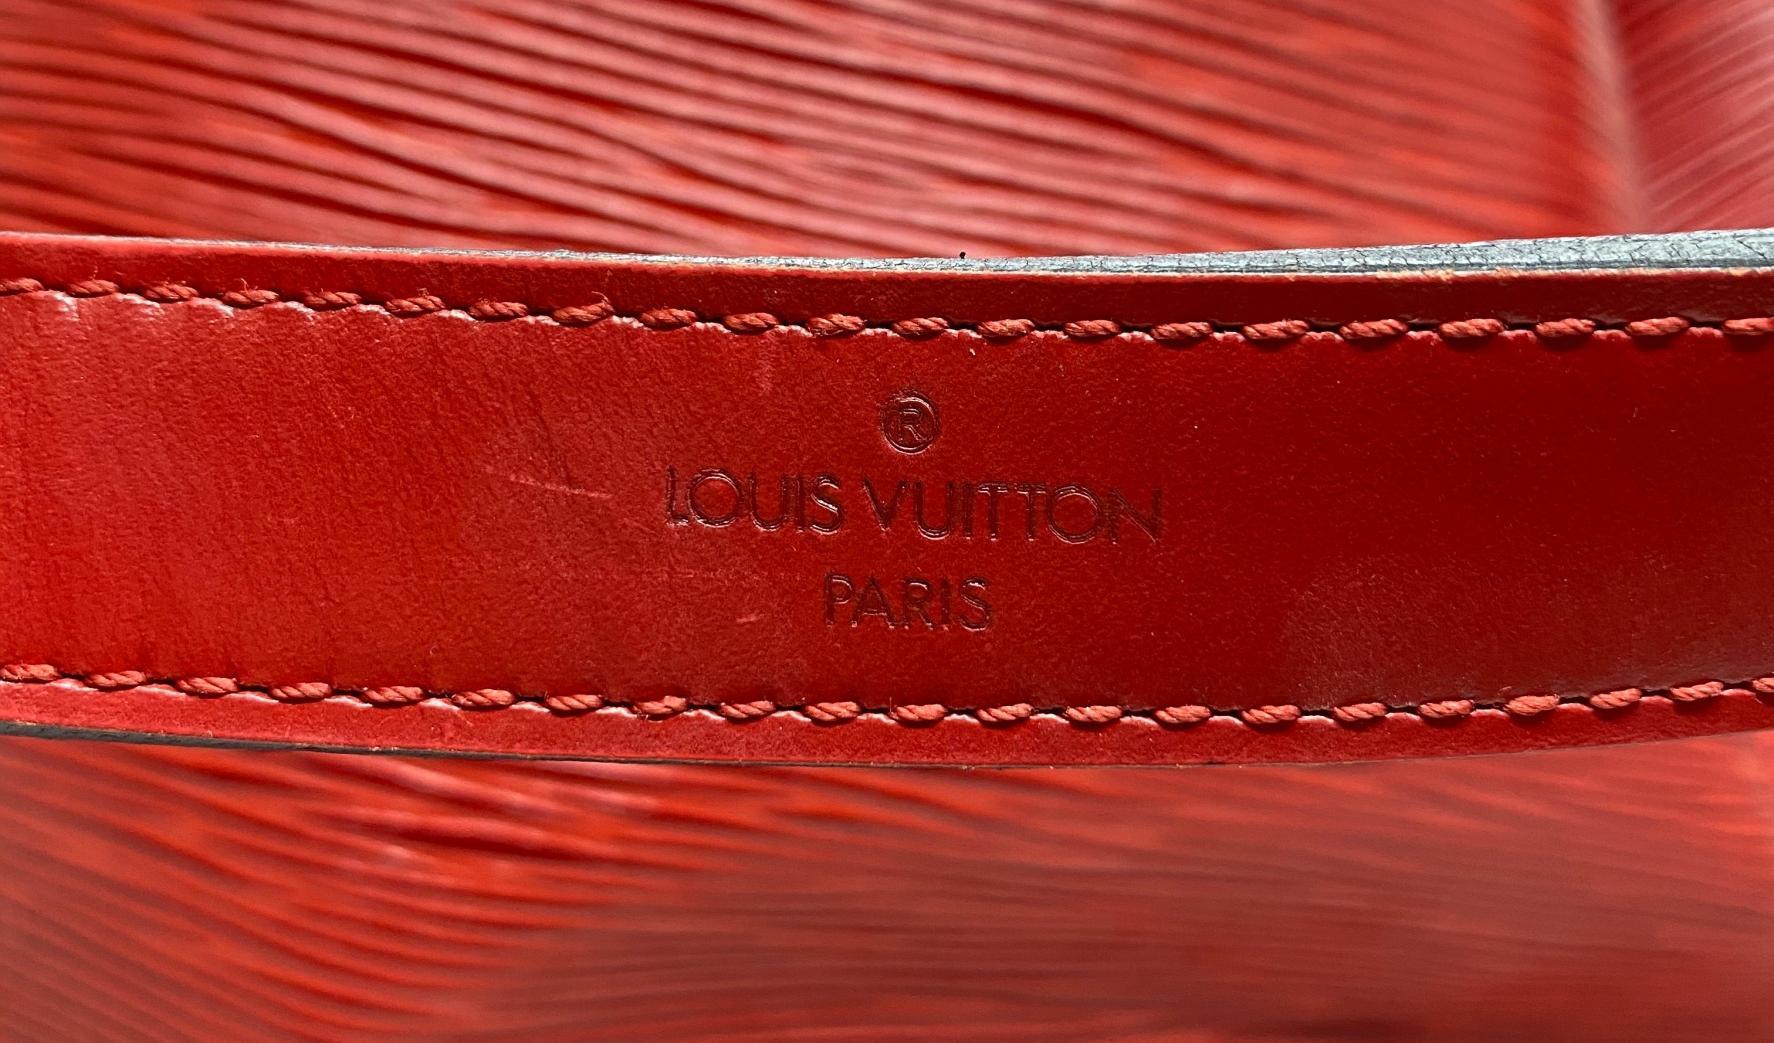 Louis Vuitton Noe PM Bucket Bag in Red EPI Leather, June 1995. 1